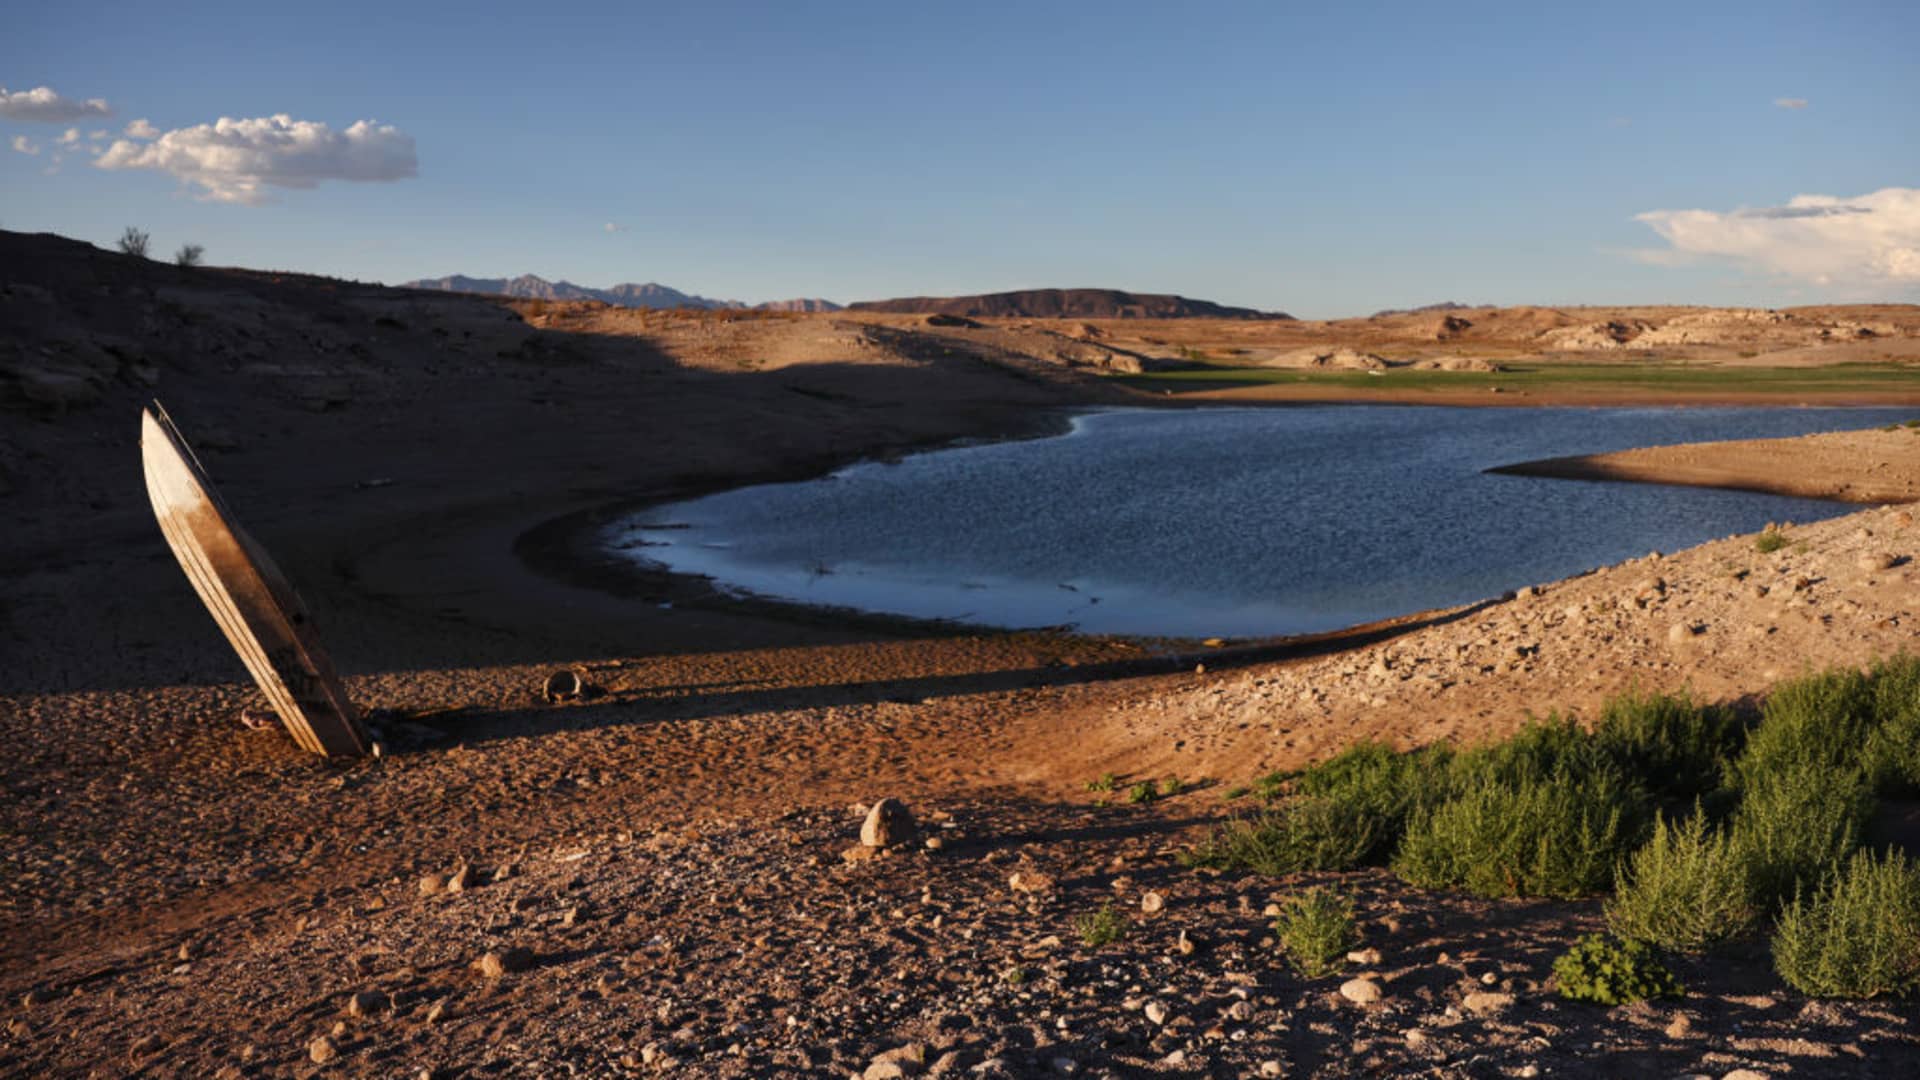 More human remains are found in receding reservoir near Las Vegas - CNBC